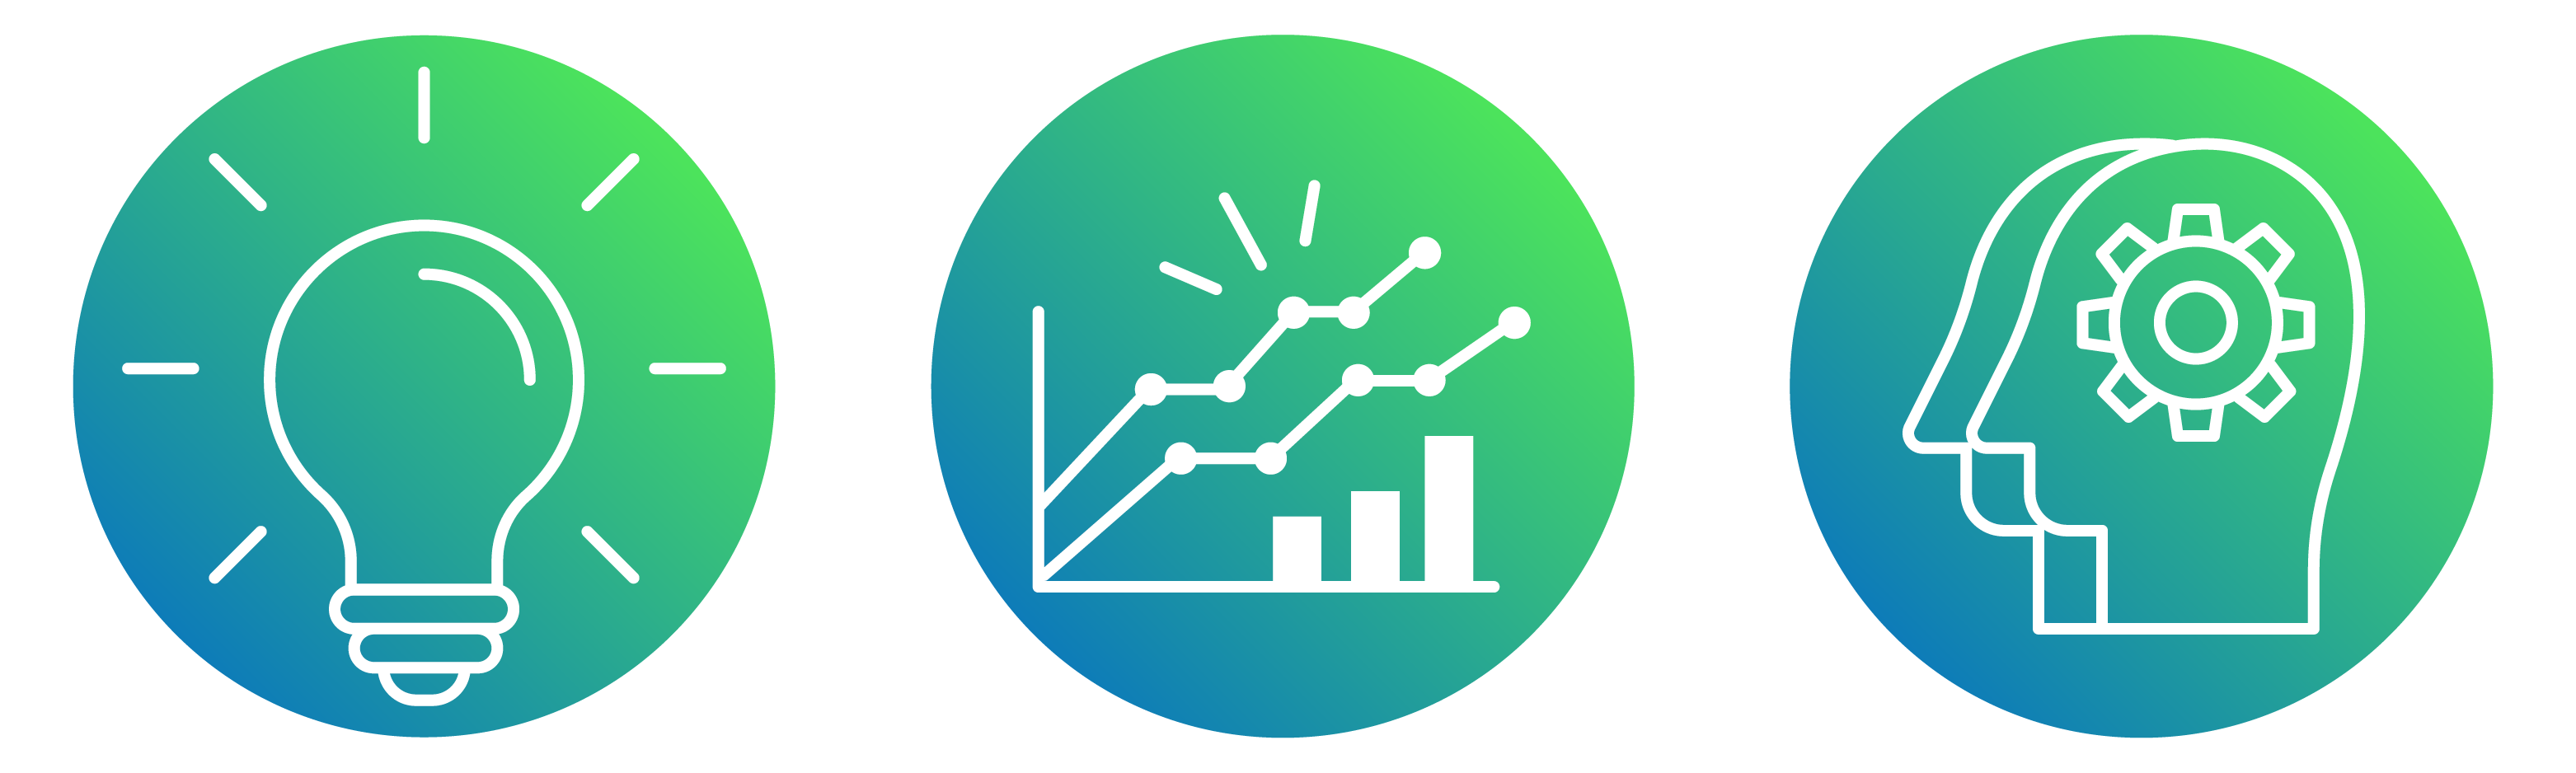 Three circular gradient icons representing lightbulb for idea, graphs and charts for research, and gears in a head to representing changing processes.